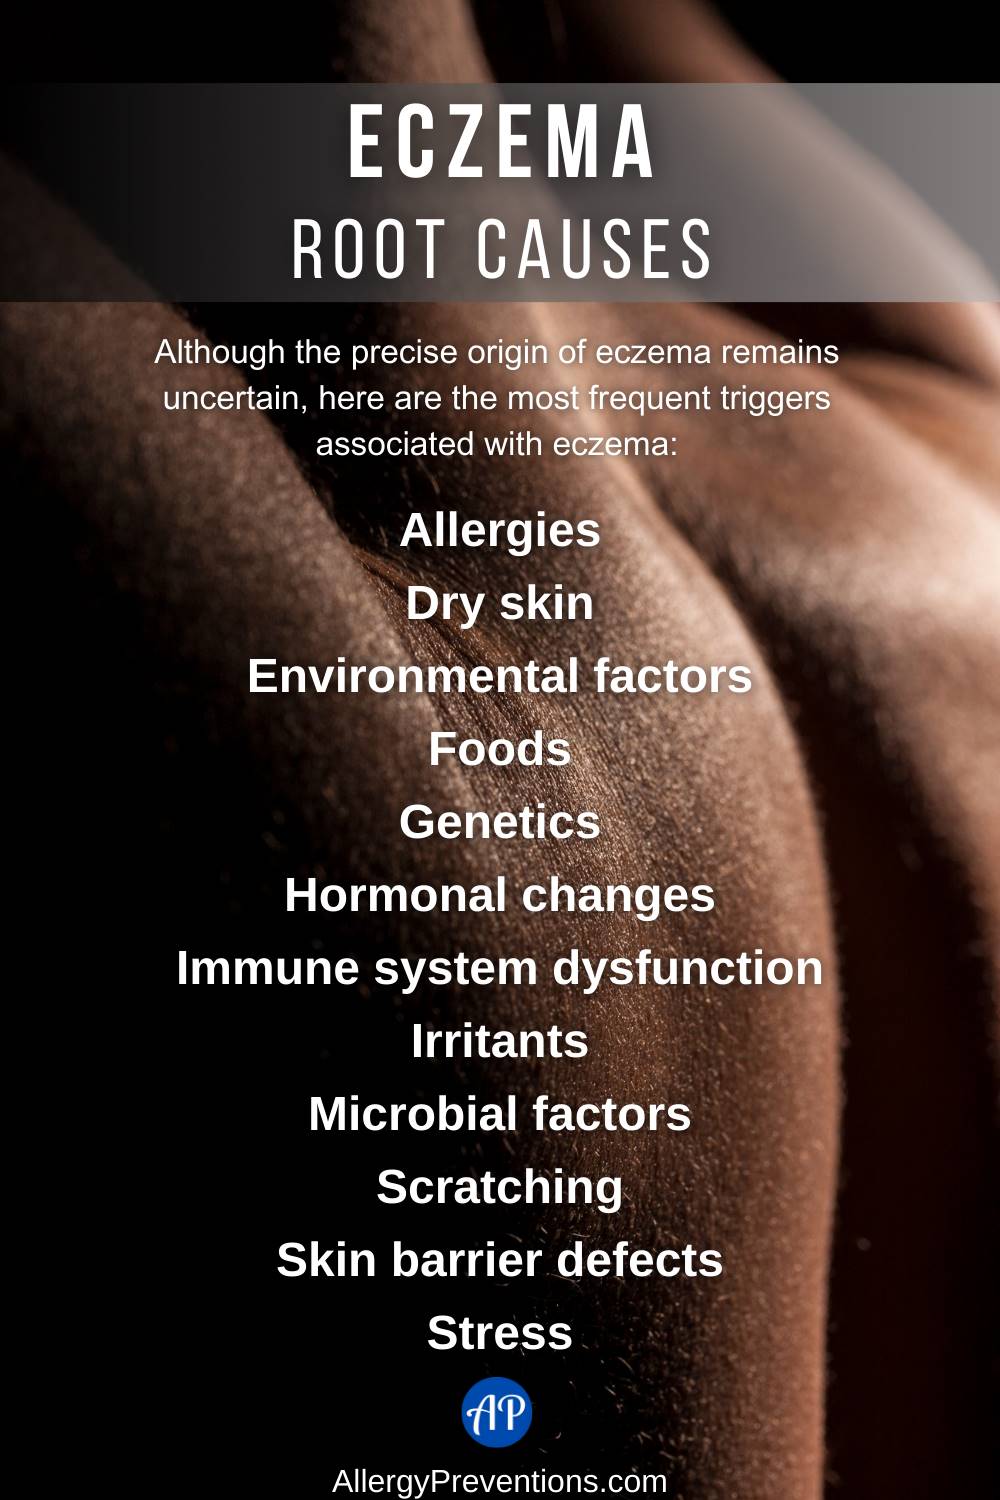 Eczema root causes infographic. Although the precise origin of eczema remains uncertain, here are the most frequent triggers associated with eczema: Allergies, Dry skin, Environmental factors, Foods, Genetics, Hormonal changes, Immune system dysfunction, Irritants, Microbial factors, Scratching, Skin barrier defects, and Stress.